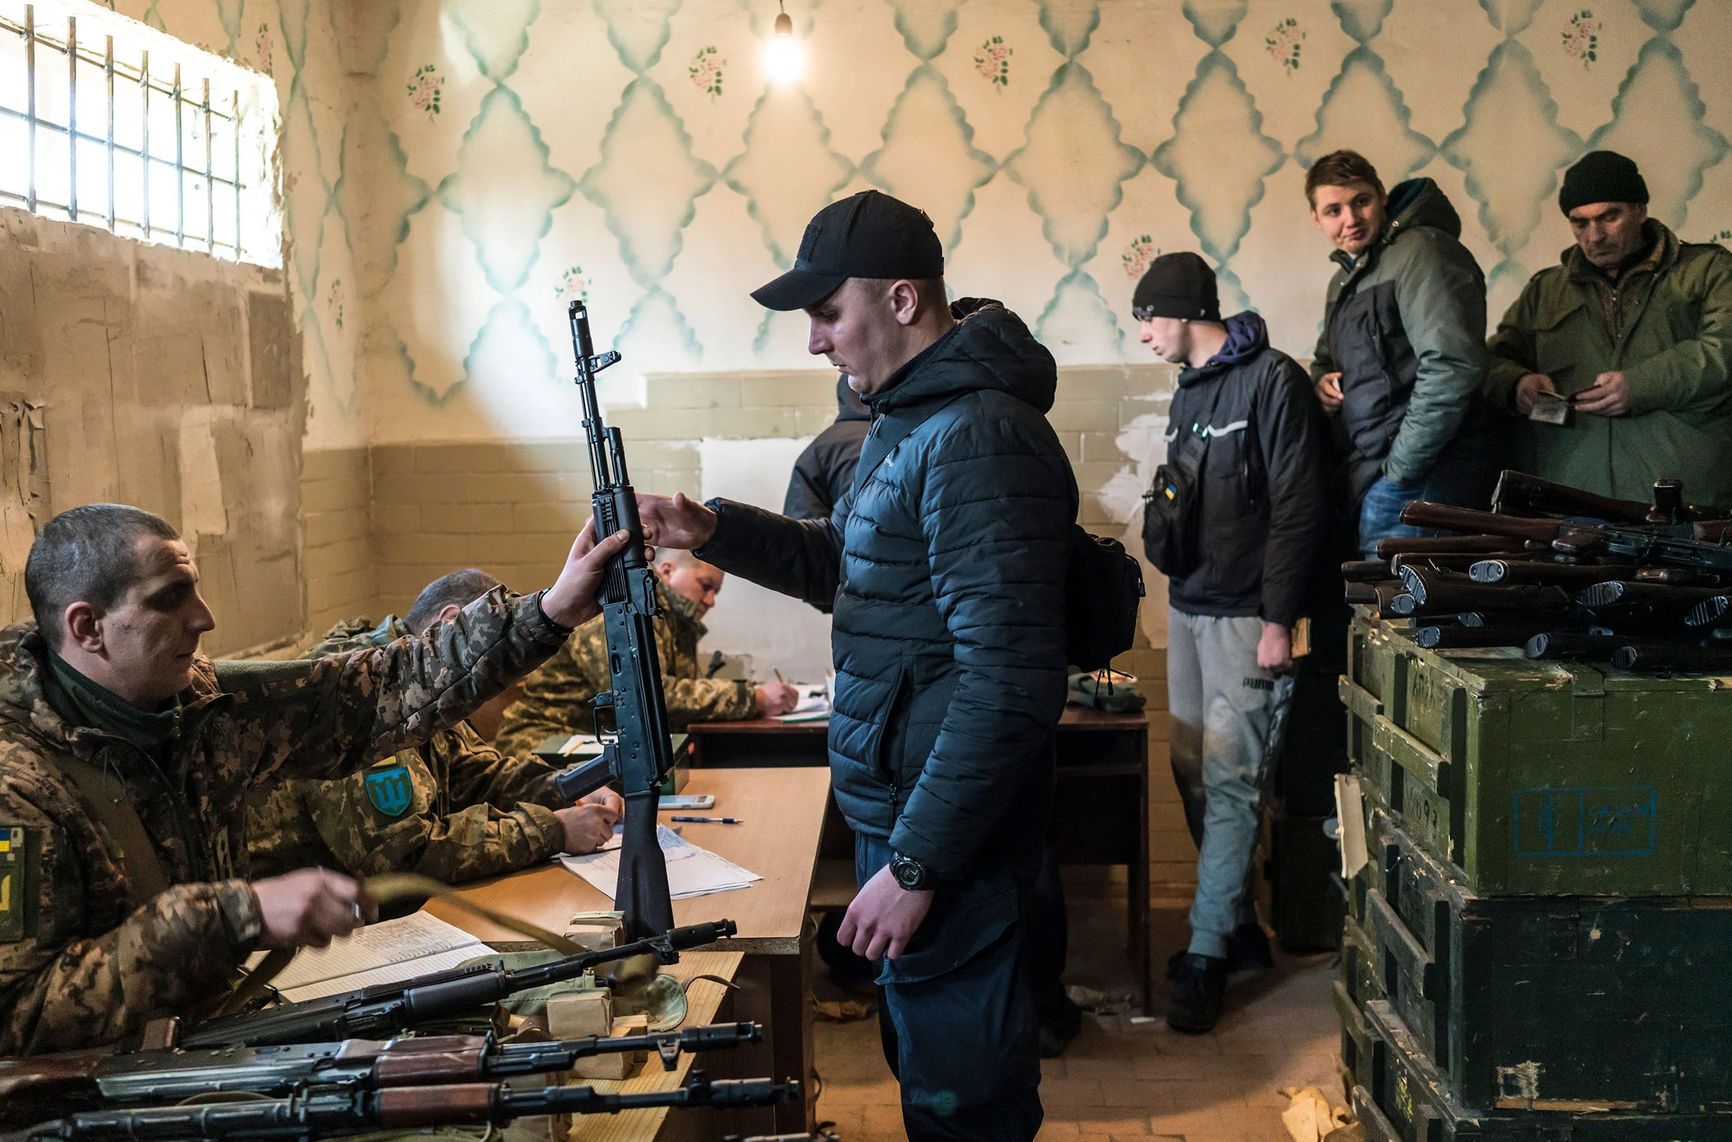 Civilian volunteers receive weapons, in a nationwide campaign to recruit, register and draft men for the war against Russia, in Fastiv, Ukraine, on Feb. 25.